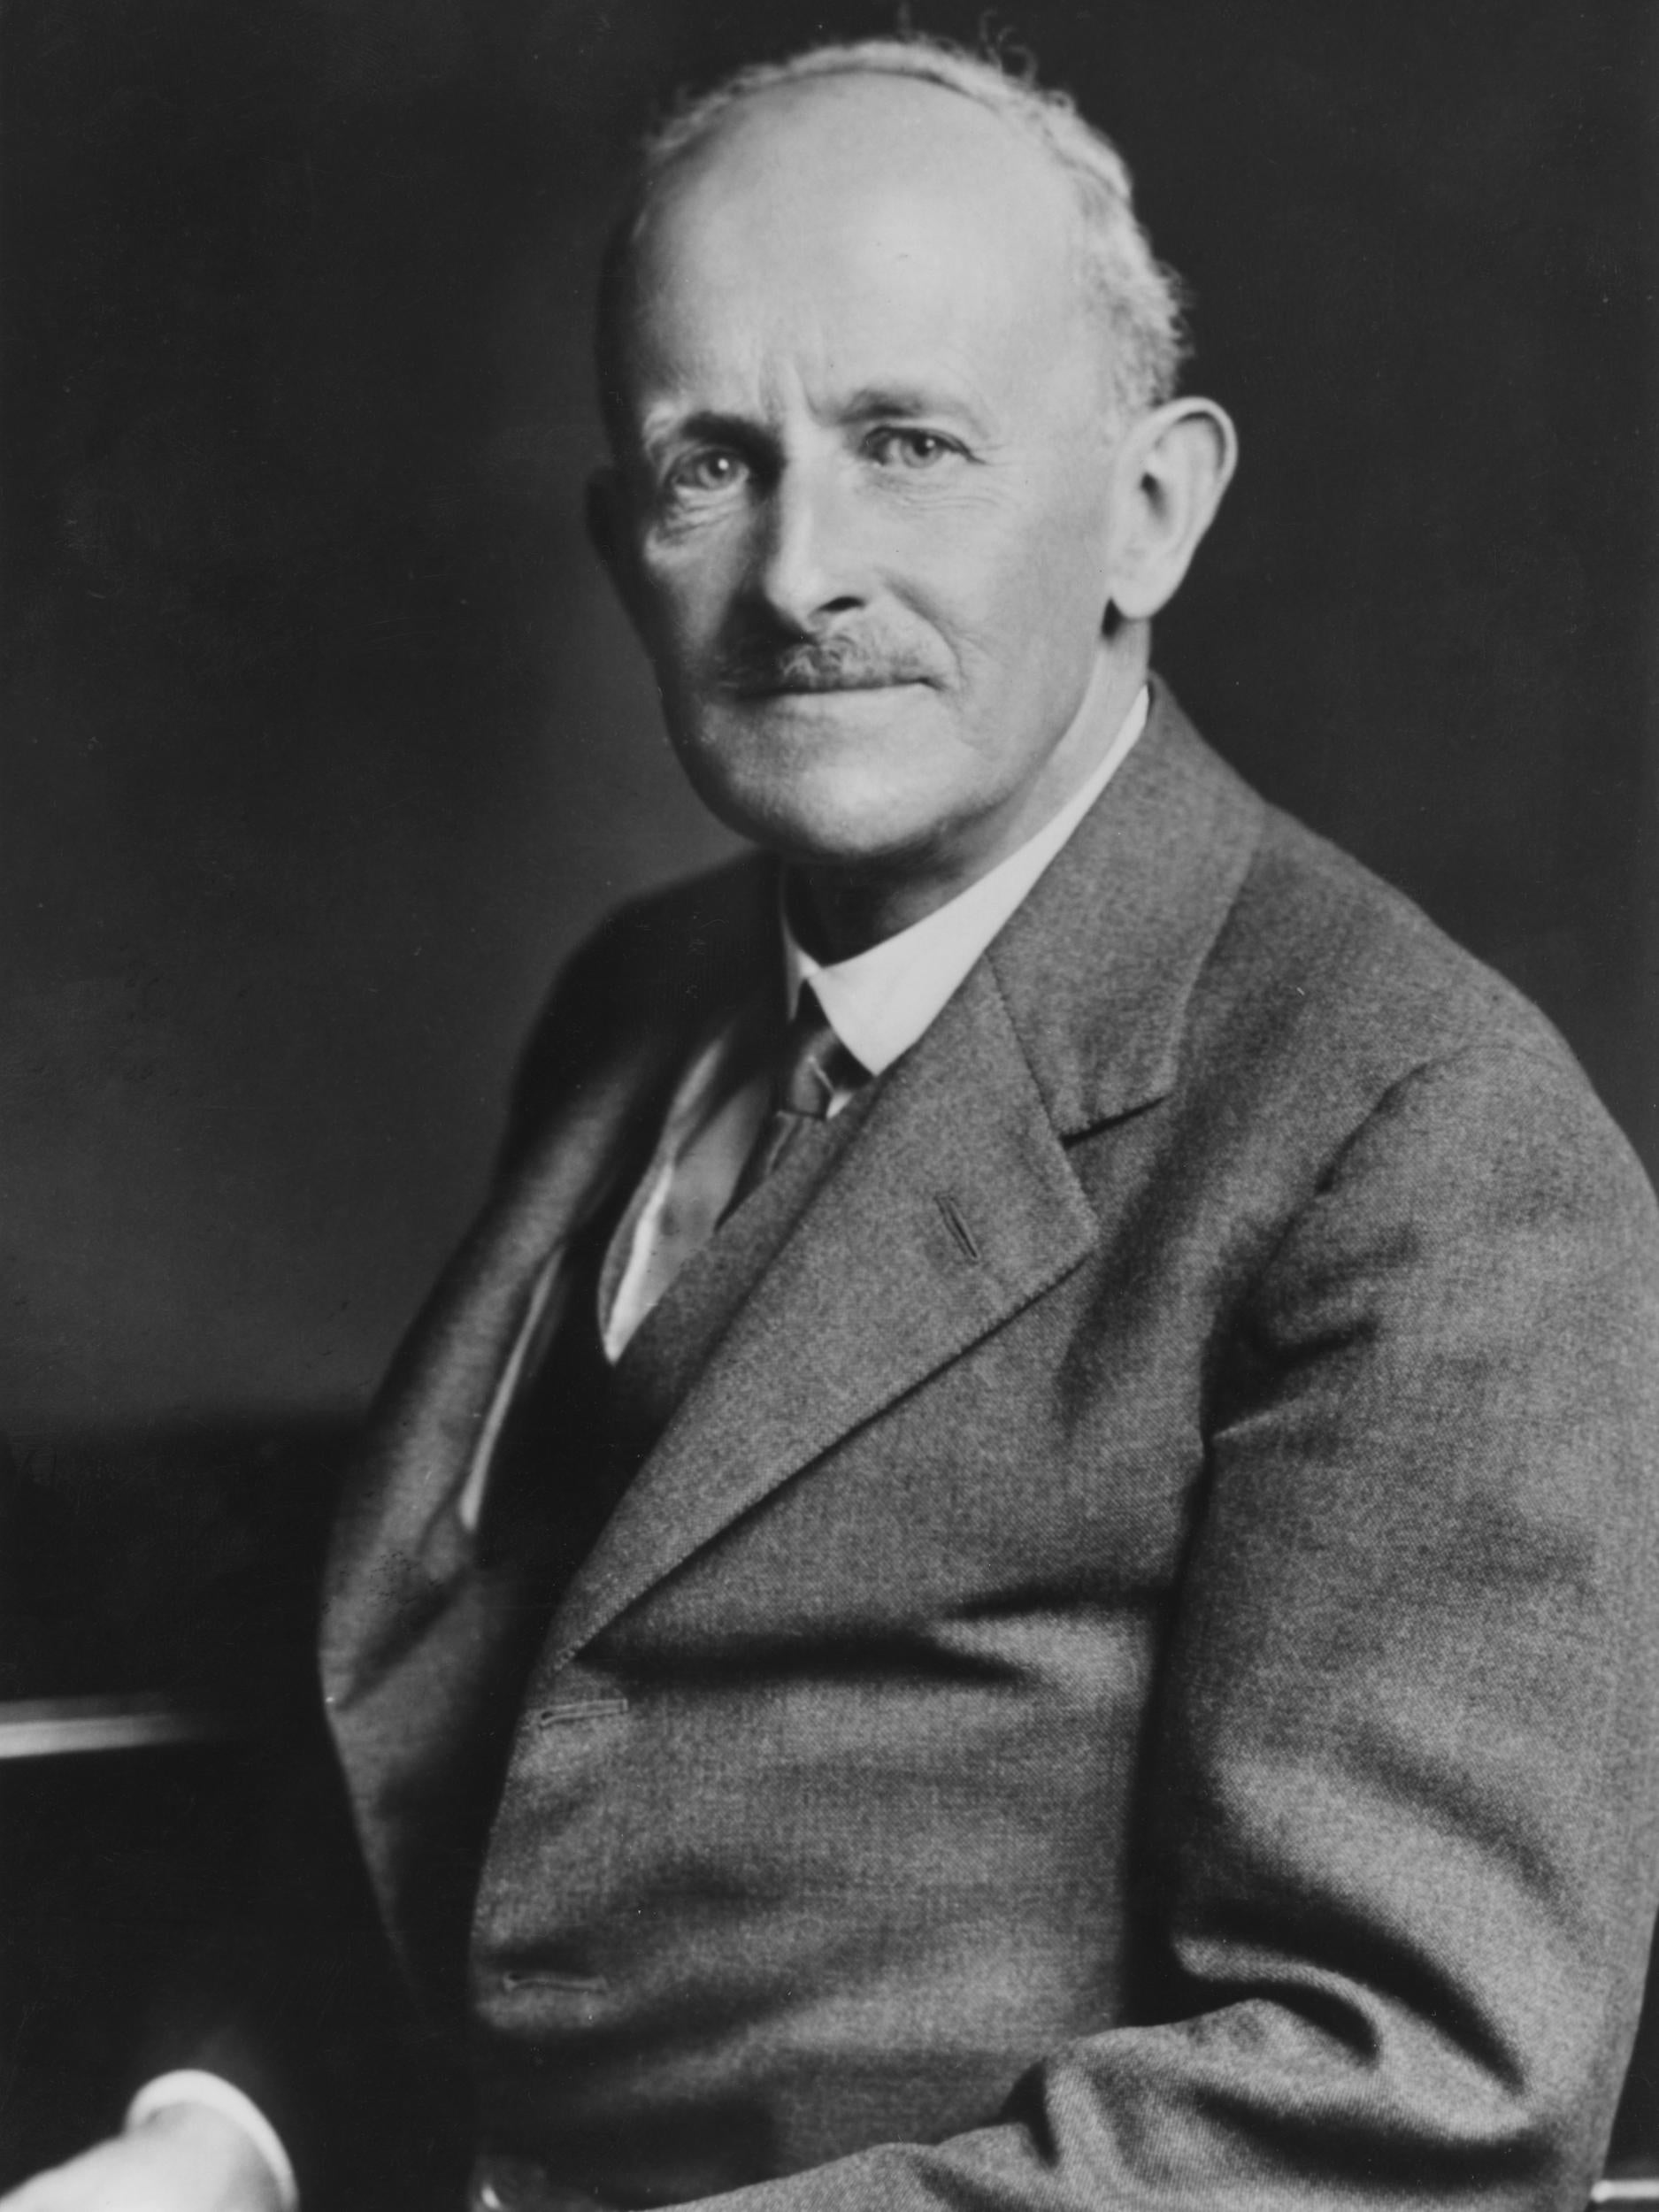 The first head of the civil service, Maurice Hankey